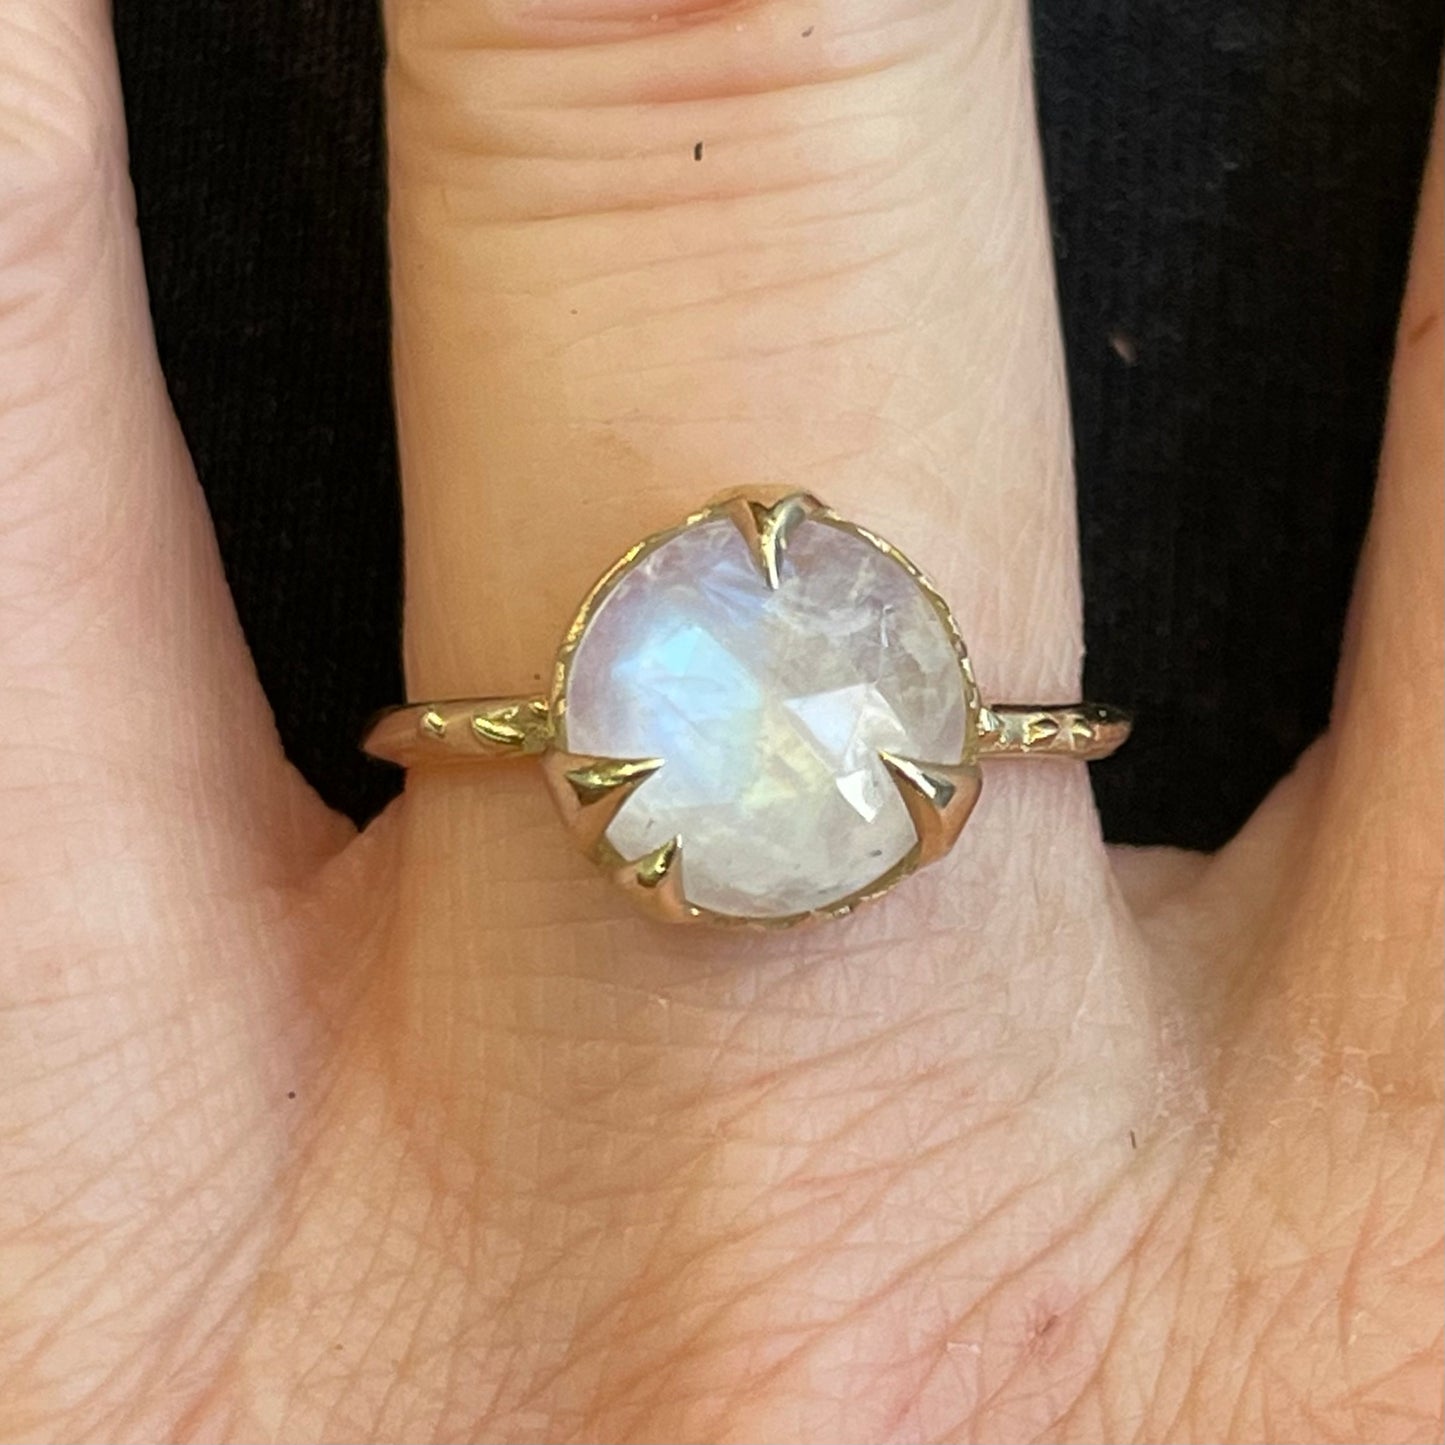 “Mystical Solitaire” moonstone and yellow gold